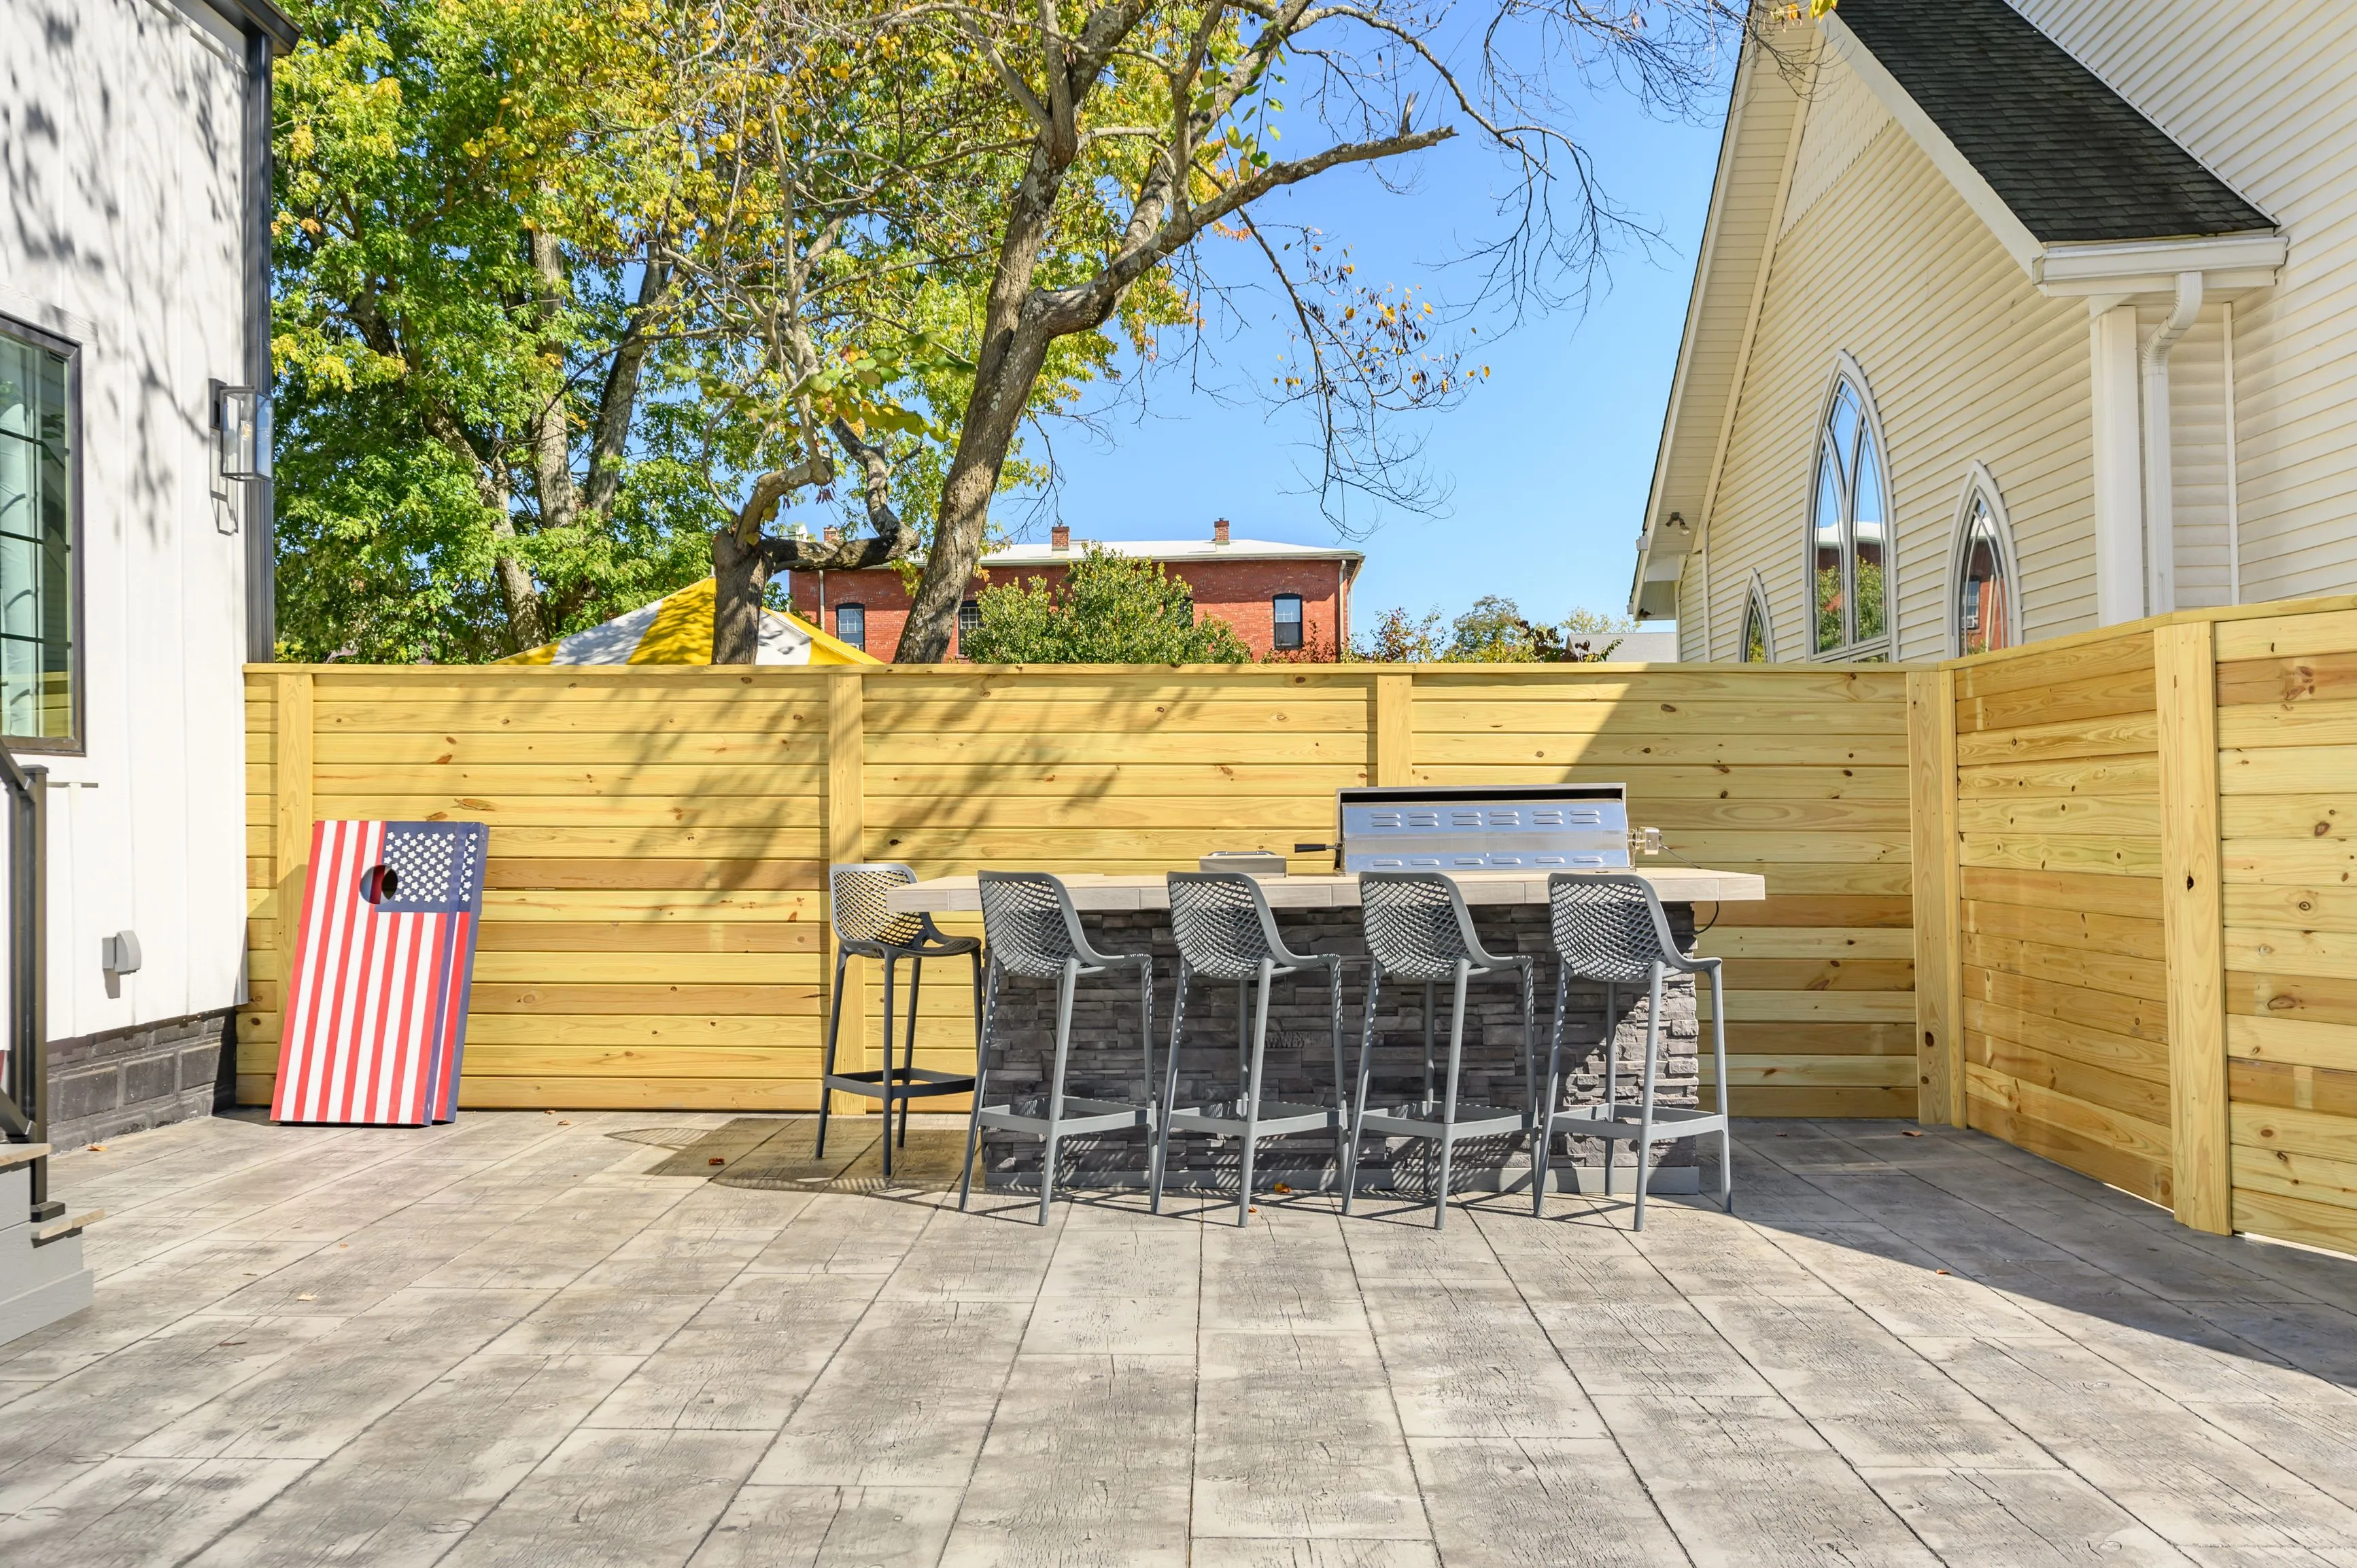 Outdoor patio area with modern furniture, a barbecue grill, and a cornhole game board, surrounded by wooden fencing with trees and a church building in the background.